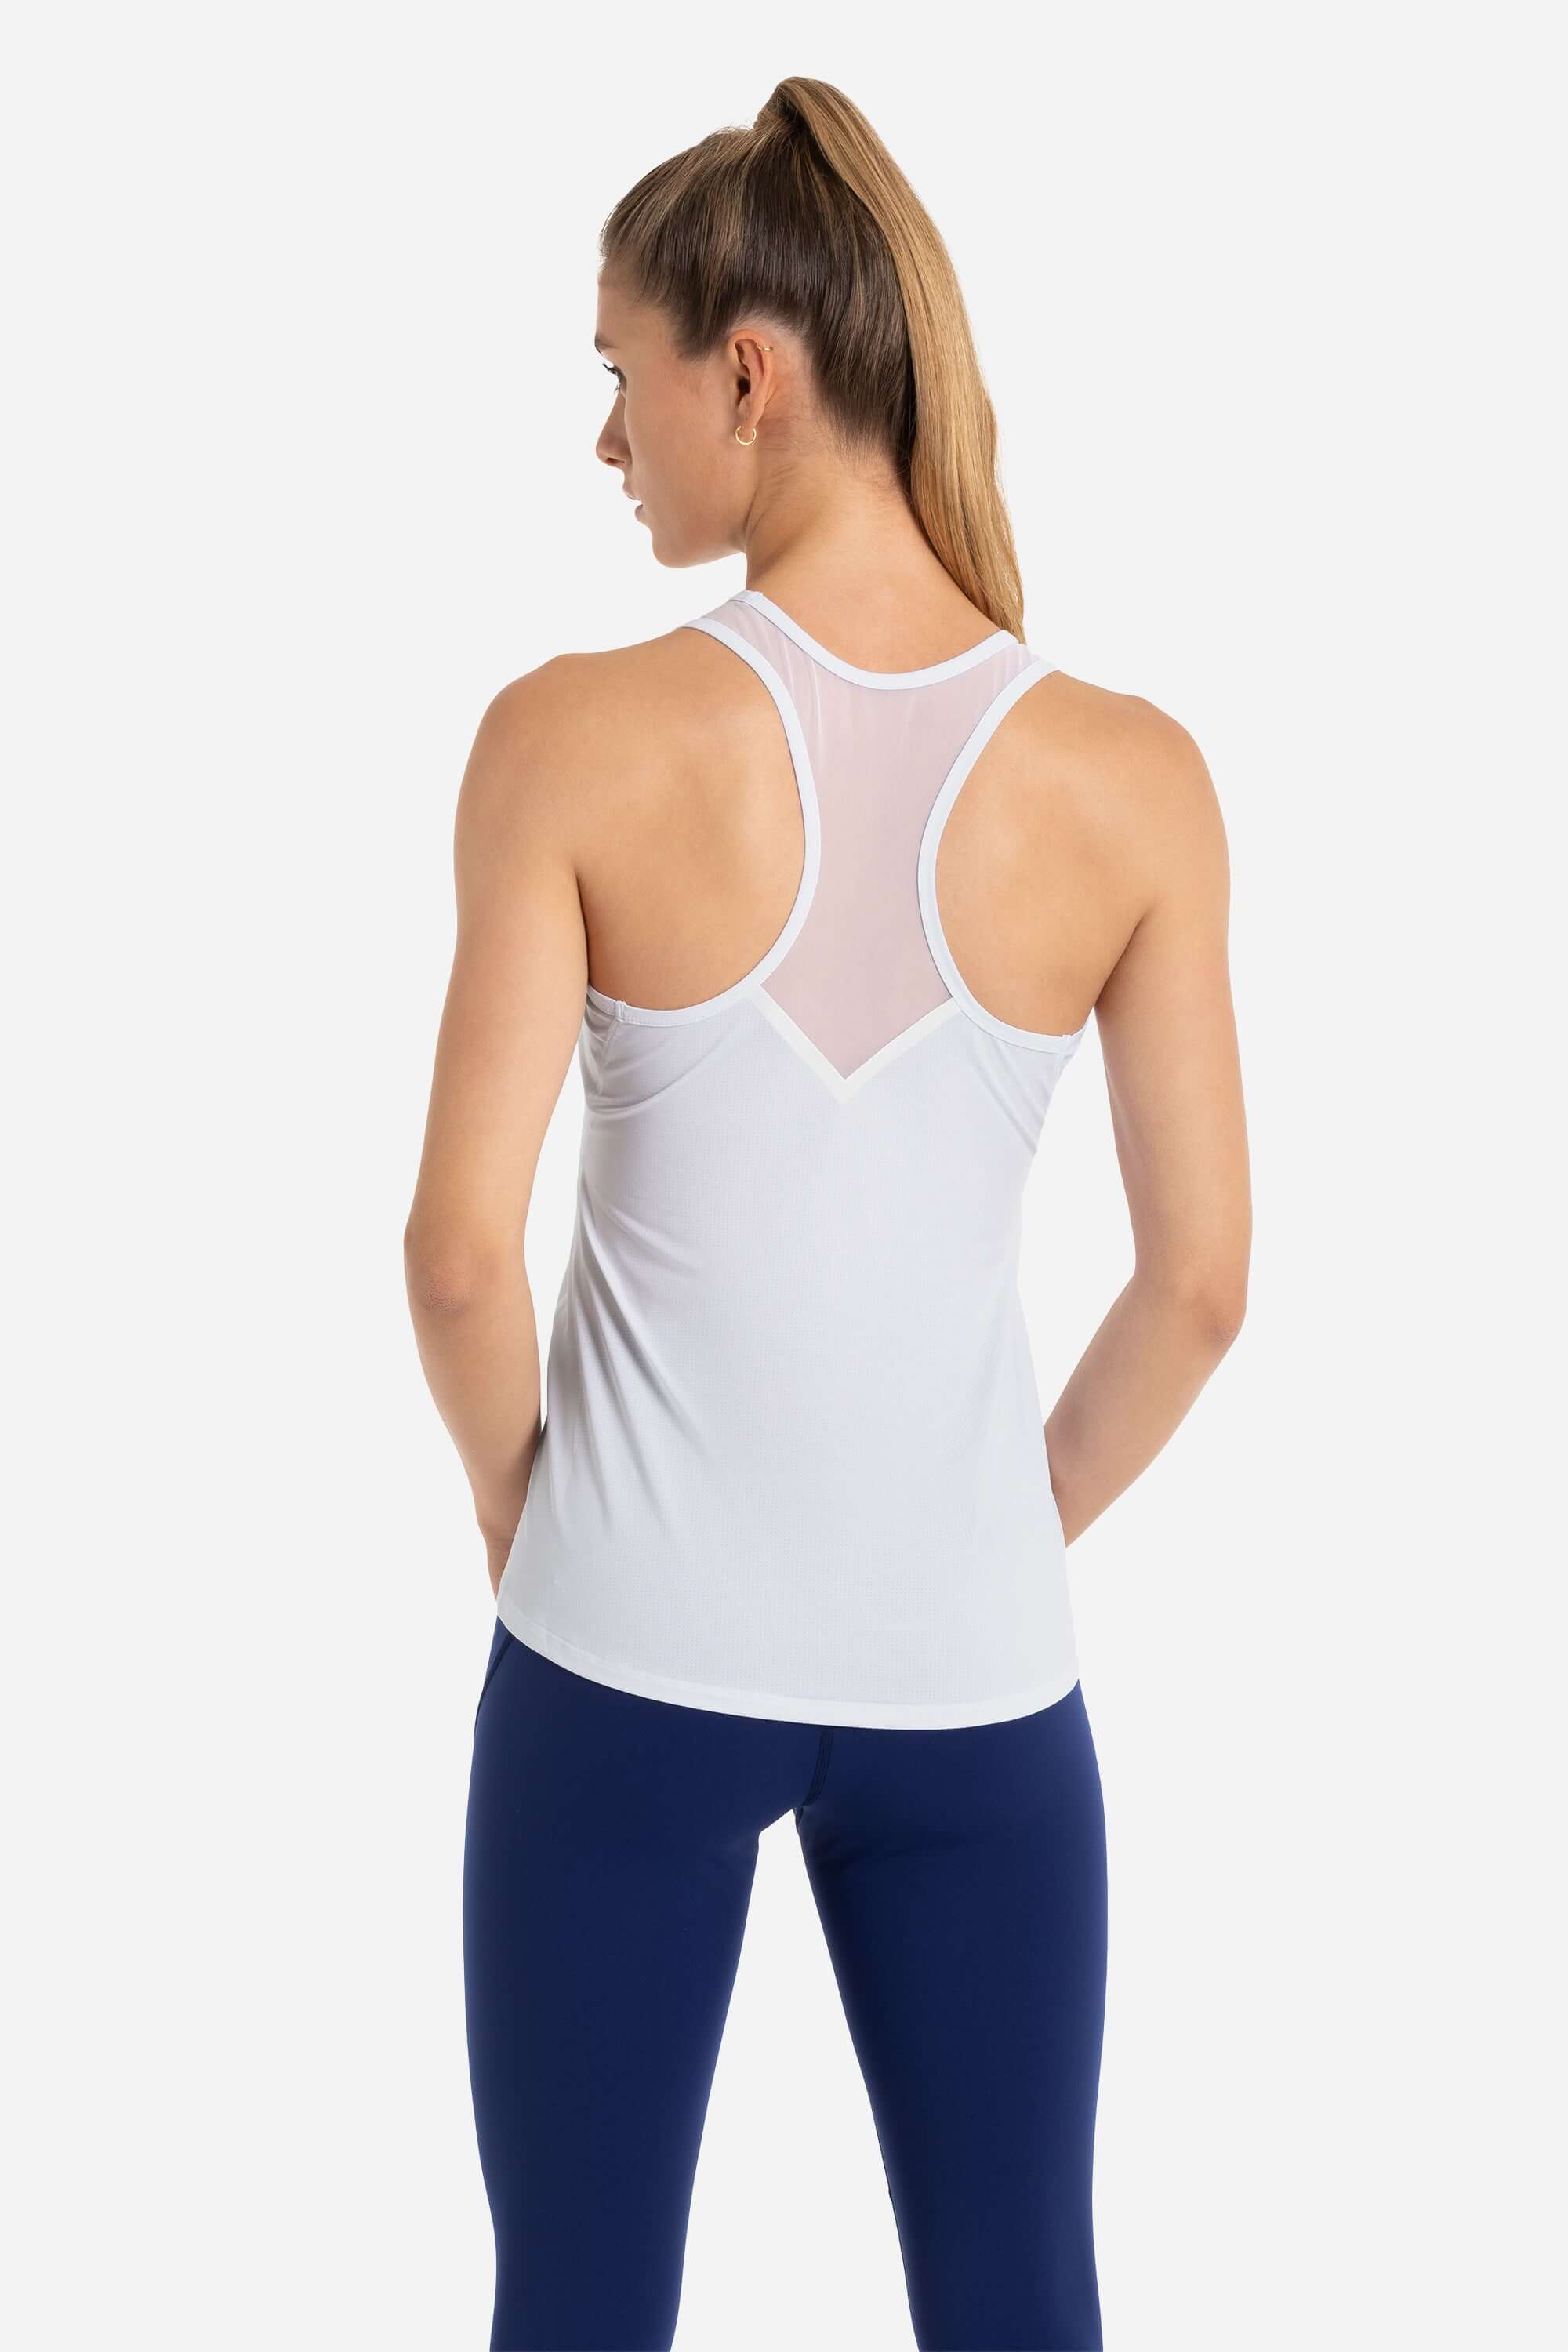 Women wearing a white workout tank top and blue gym leggings from AYCANE